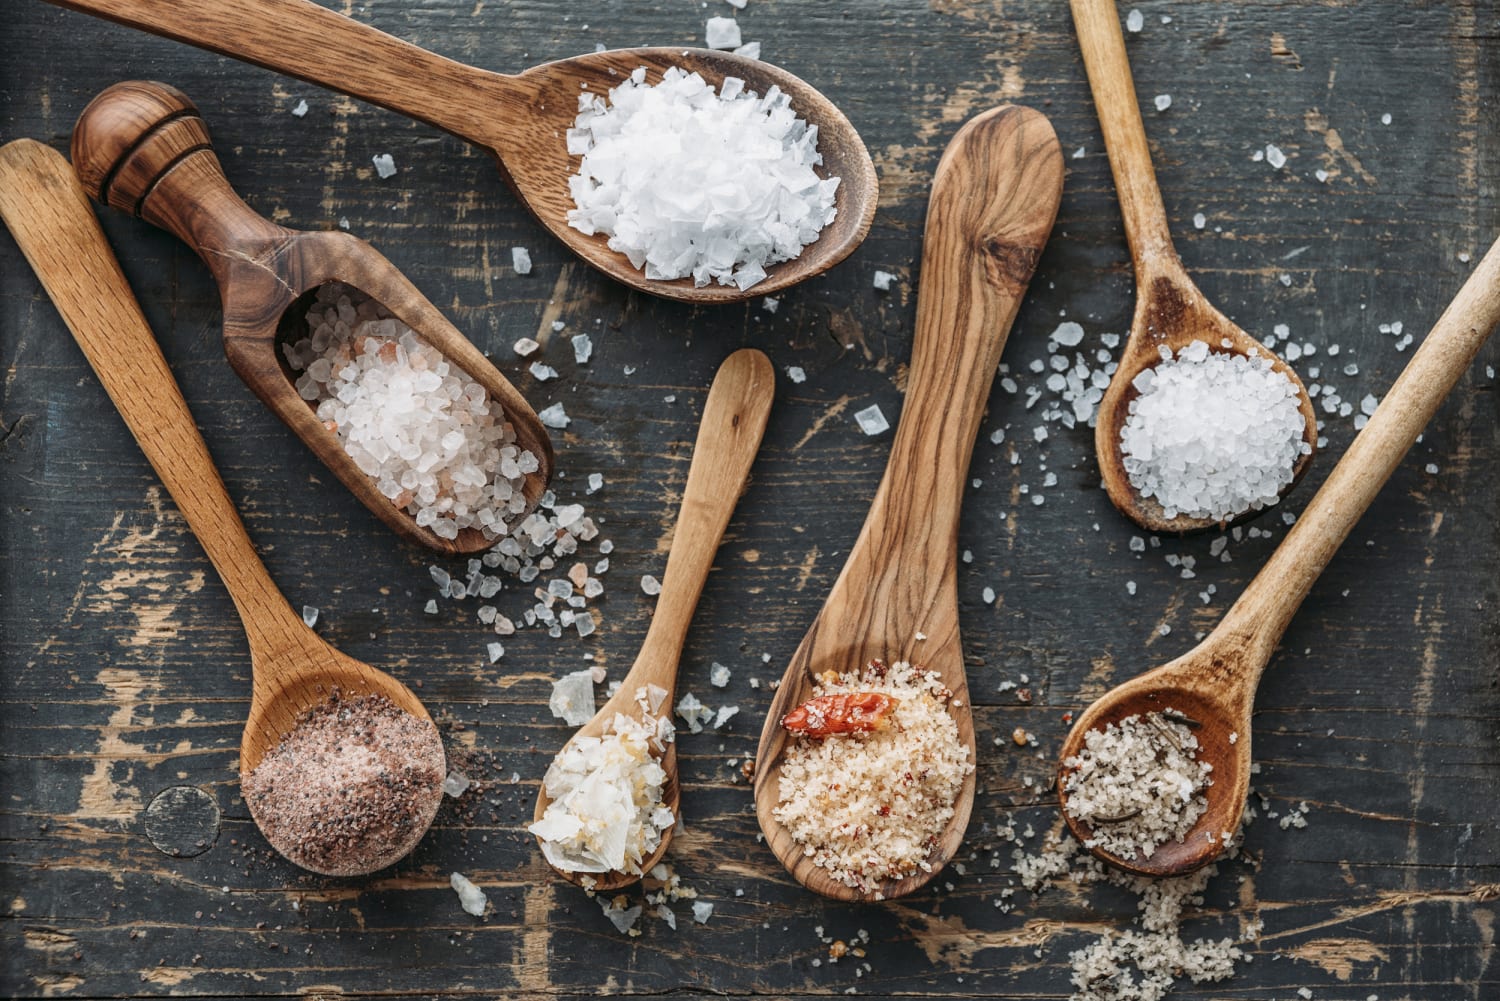 Salt Grinders are Making Your Food Worse (and they're a ripoff) 